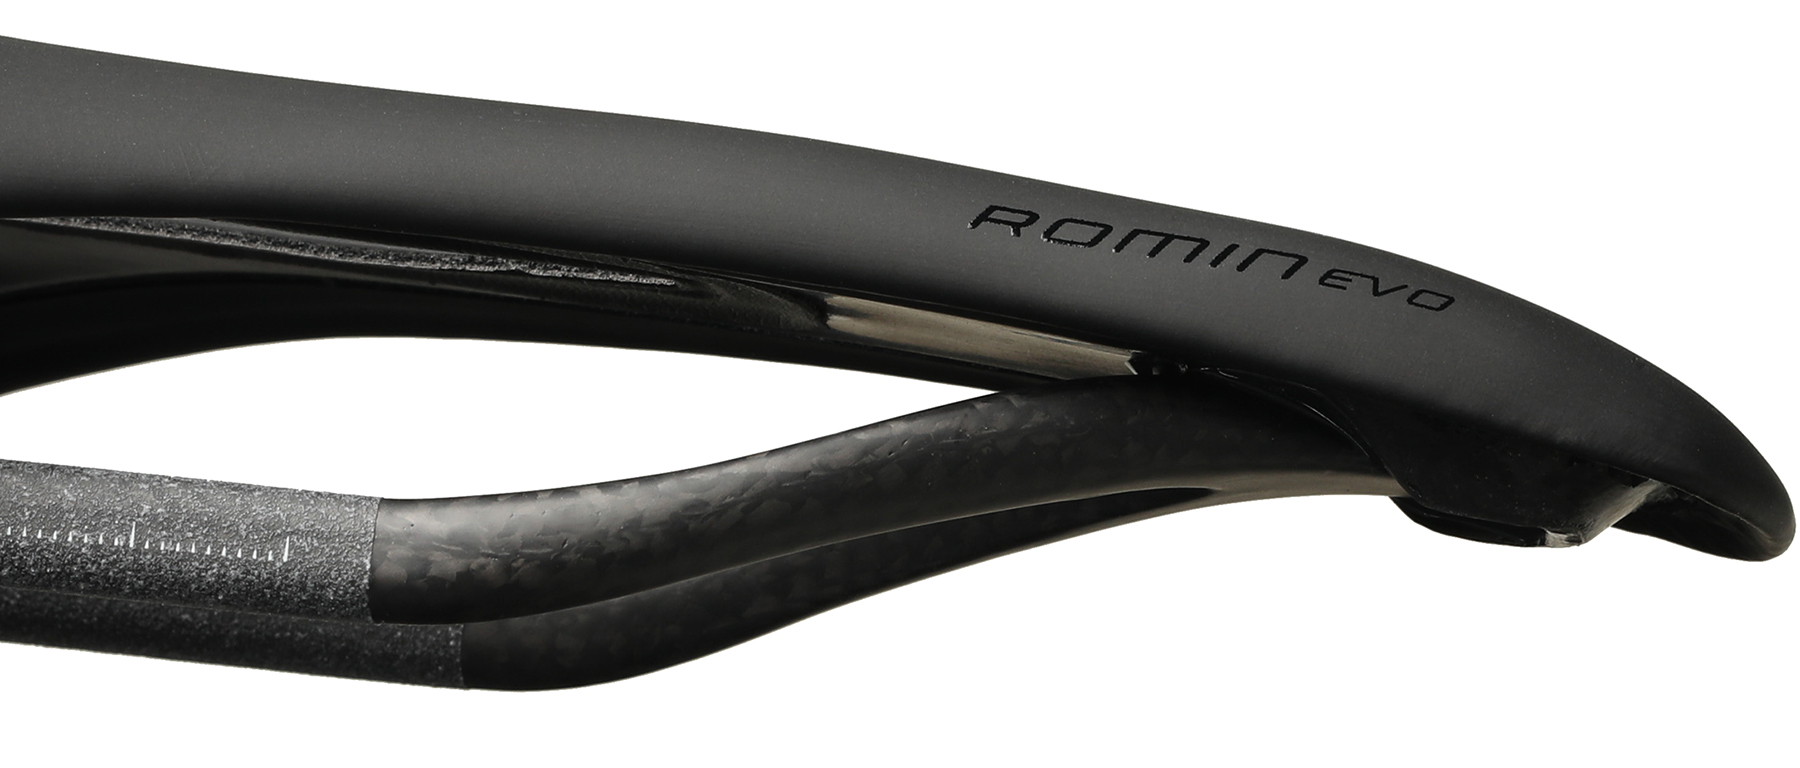 Specialized S-Works Romin EVO Carbon Saddle